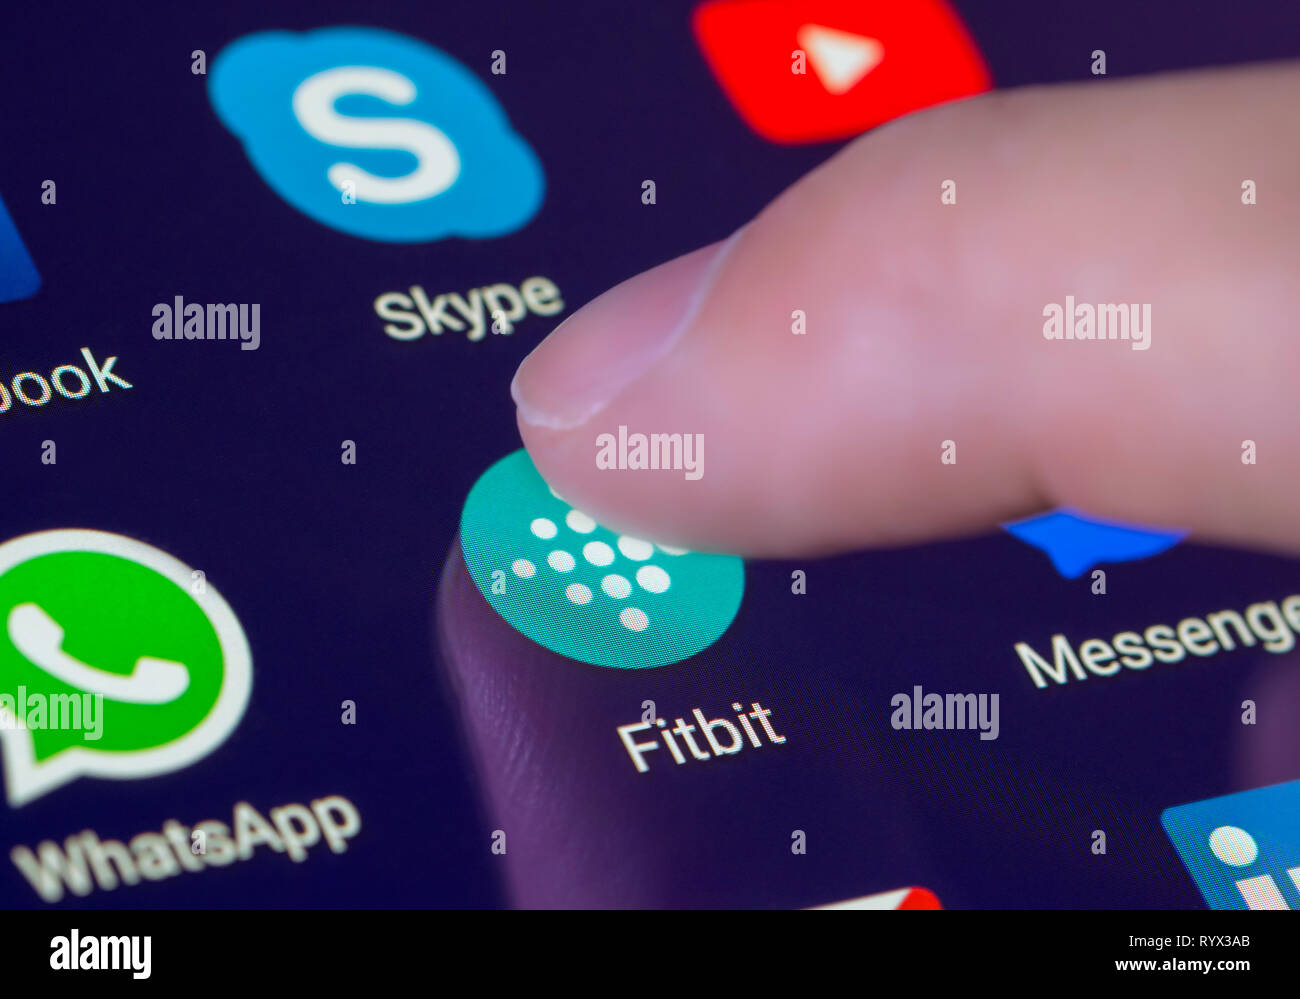 Finger pressing the Fitbit app icon on a tablet or mobile phone  touchscreen. Fitbit shortcut Stock Photo - Alamy